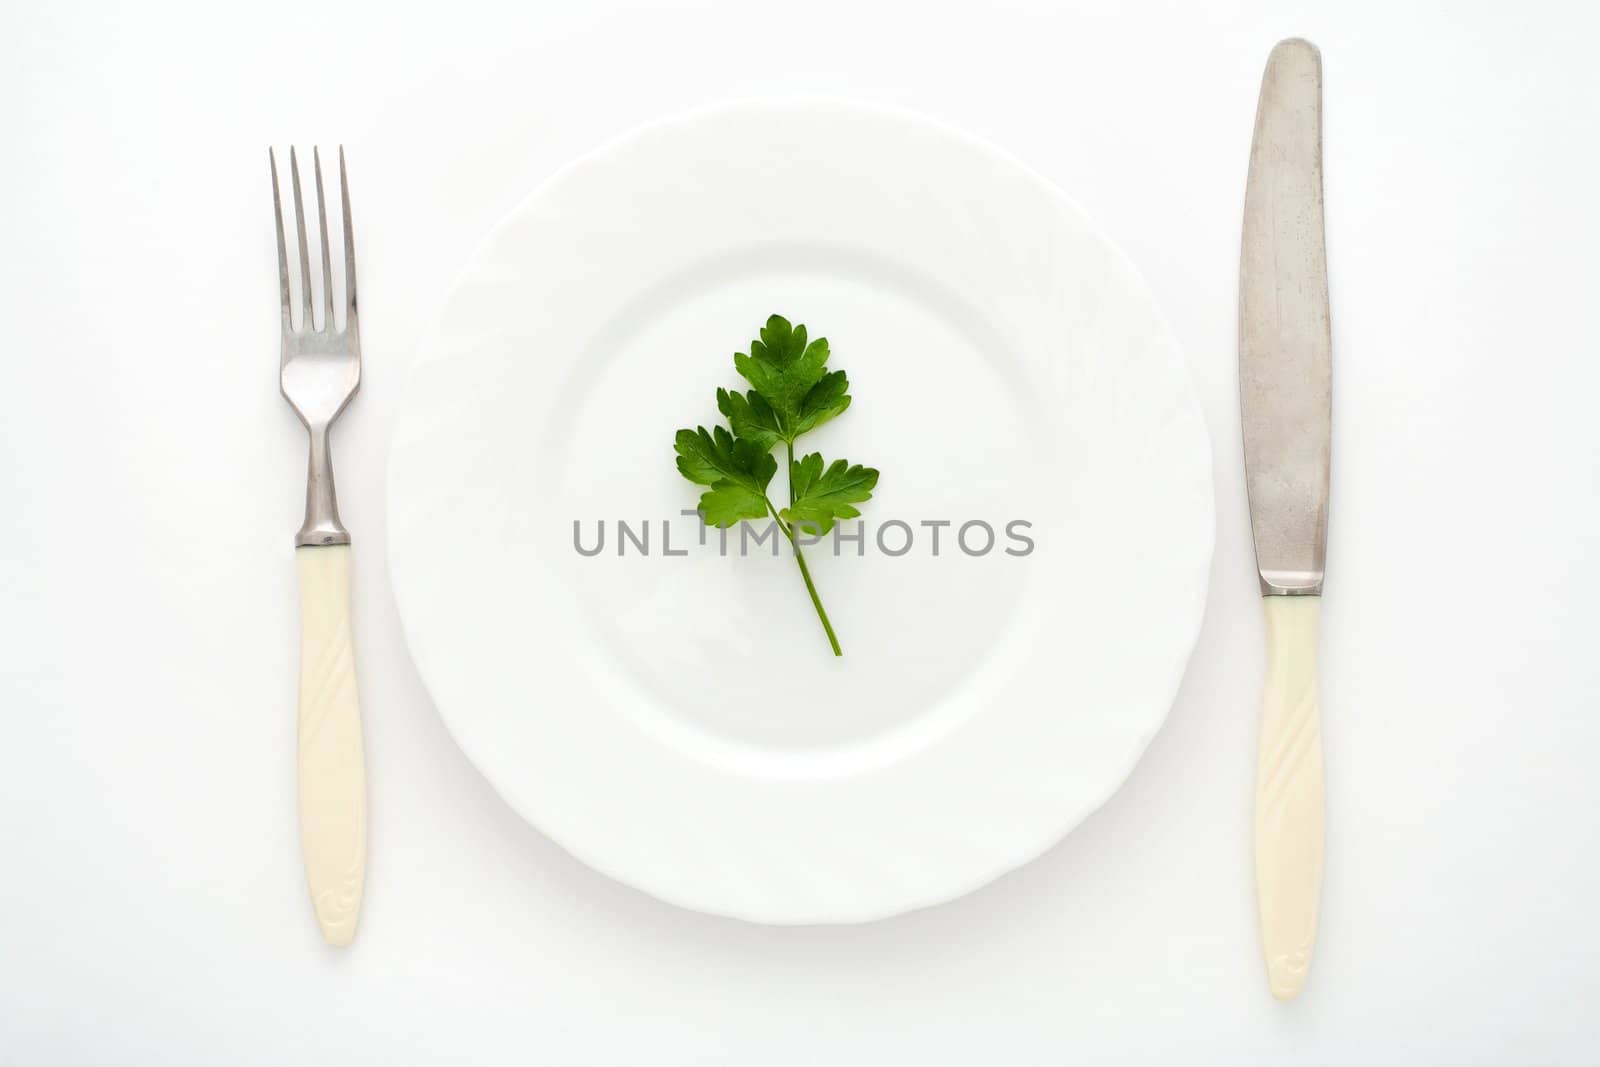 An image of fork, knife and plate